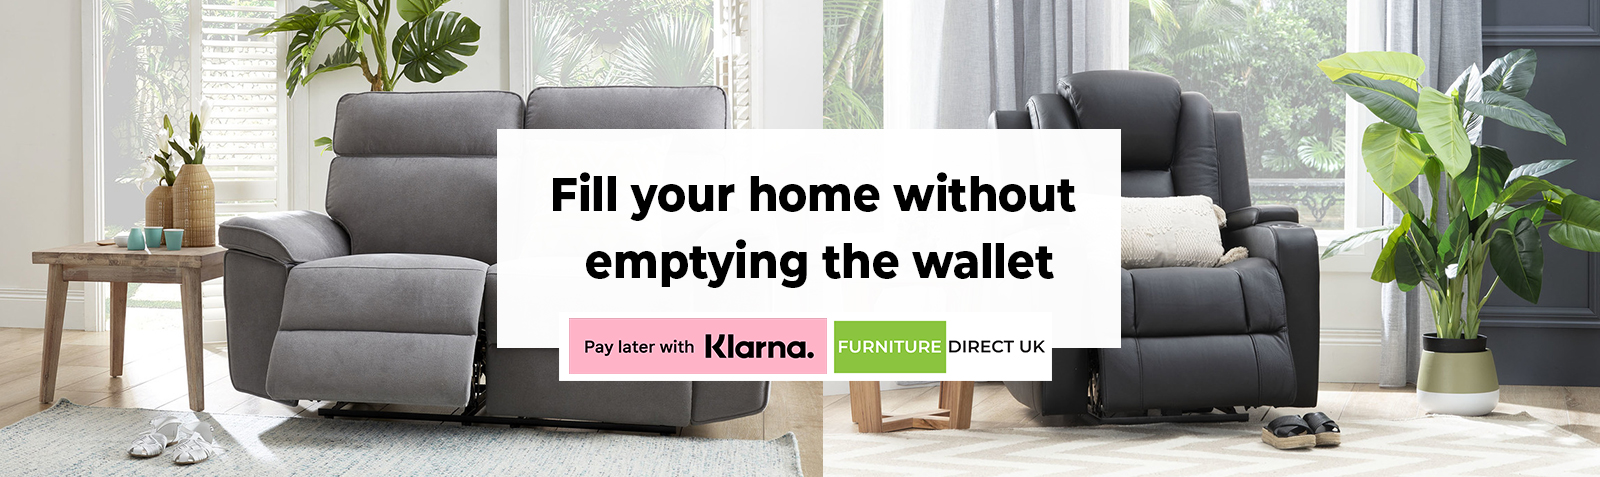 Pay Later With Klarna - Furniture Direct UK